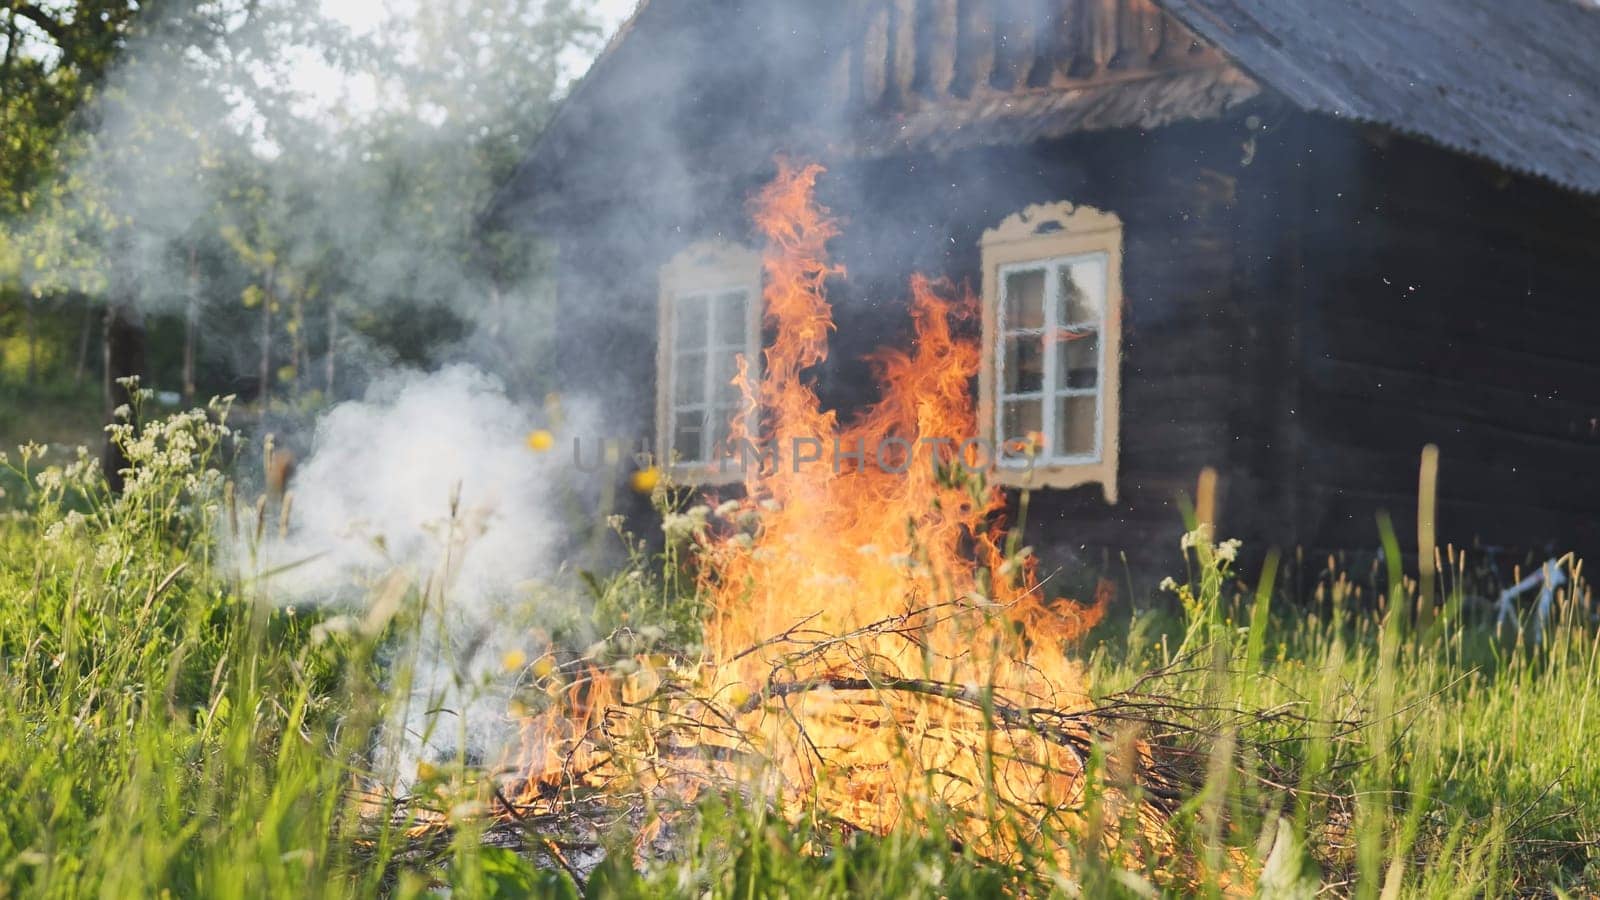 Burning branches outside the village house in eastern europe. by DovidPro